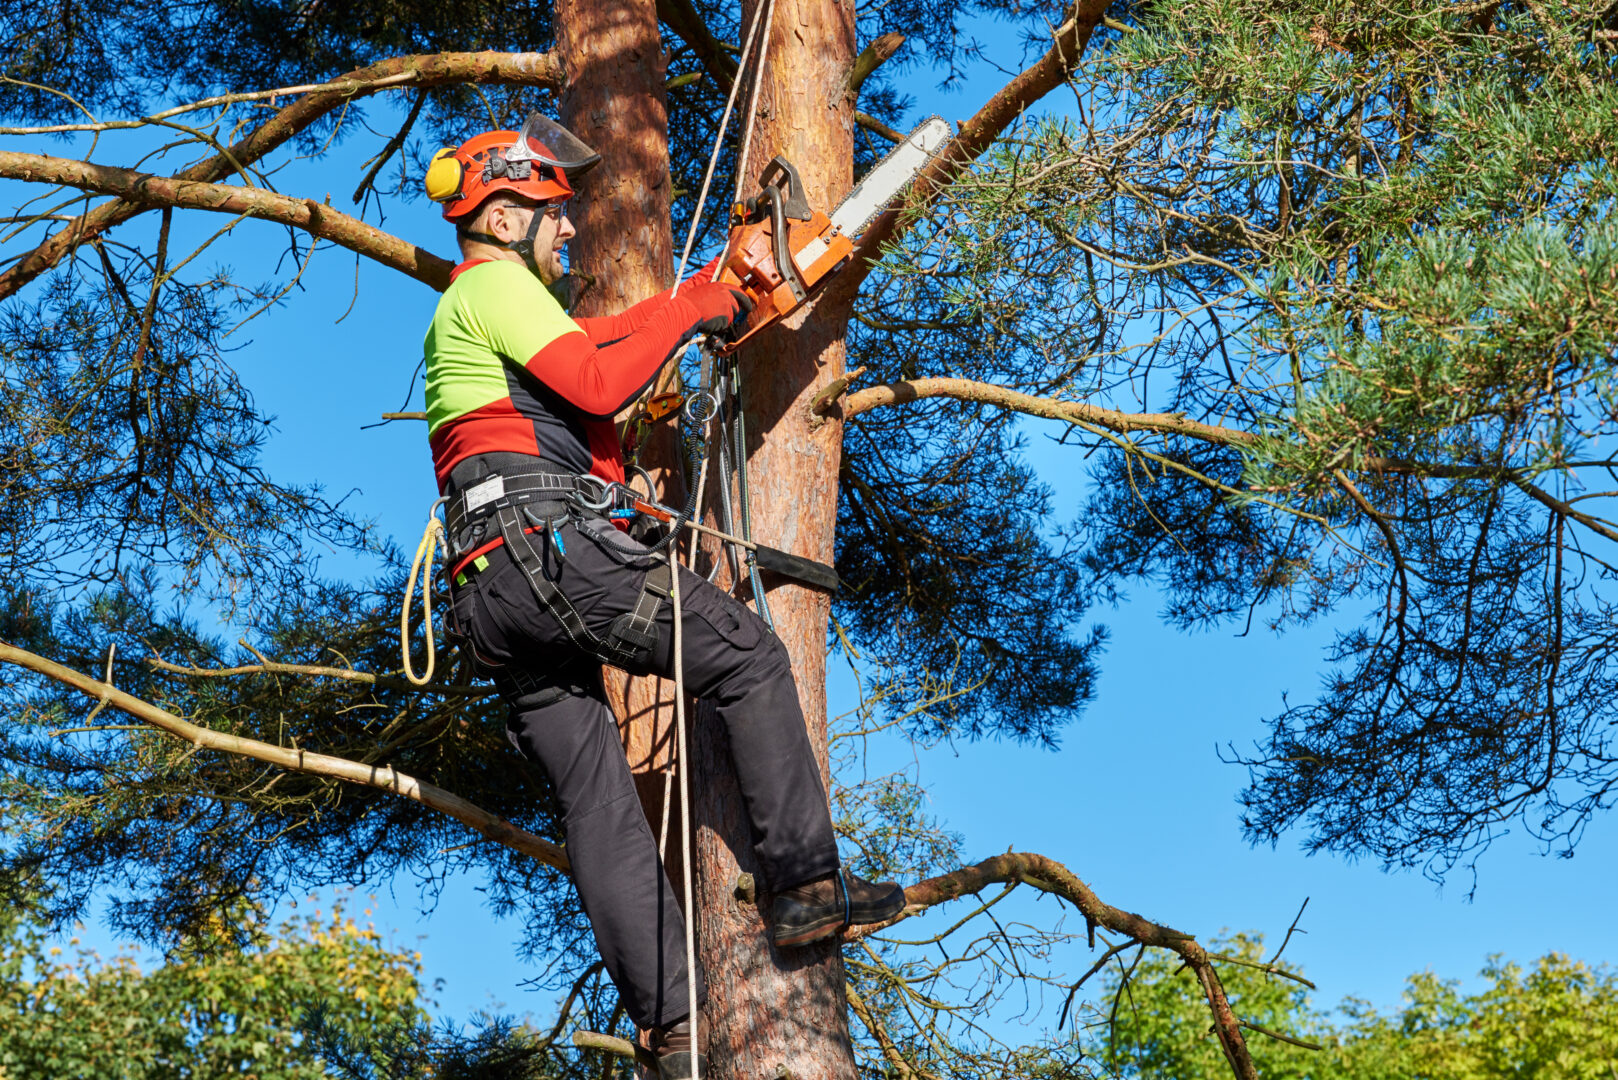 Want to learn to climb trees? Penn State course has you covered.